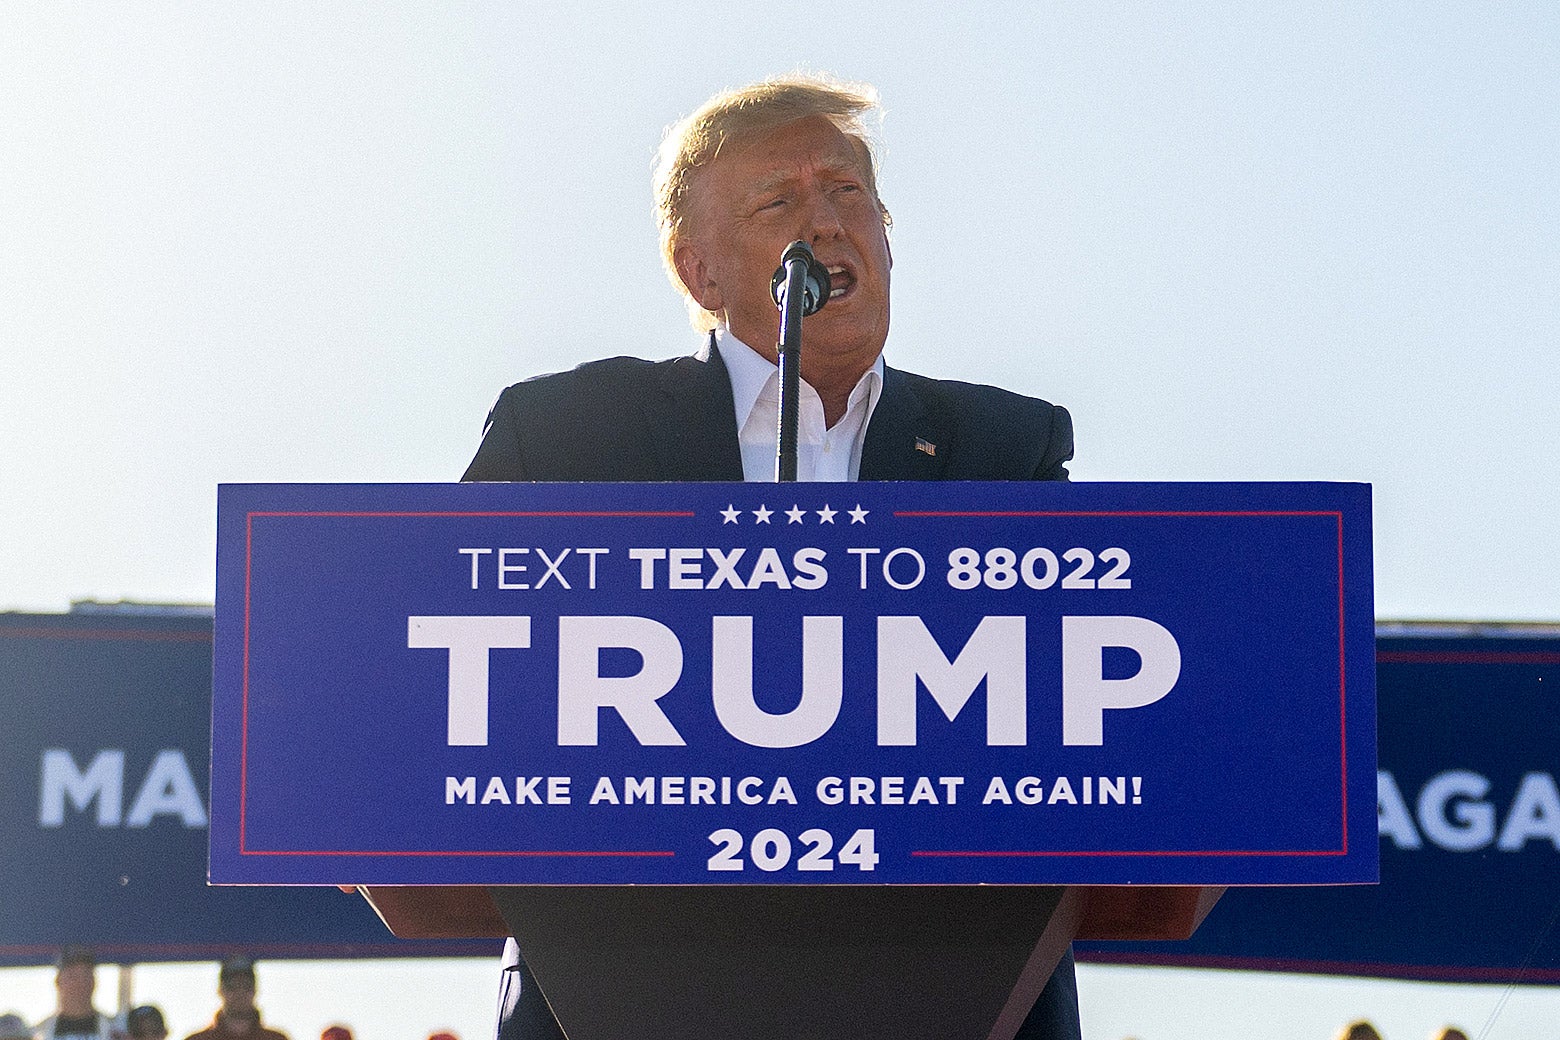 Former U.S. President Donald Trump speaks during a rally at the Waco Regional Airport on March 25 in Waco, Texas.